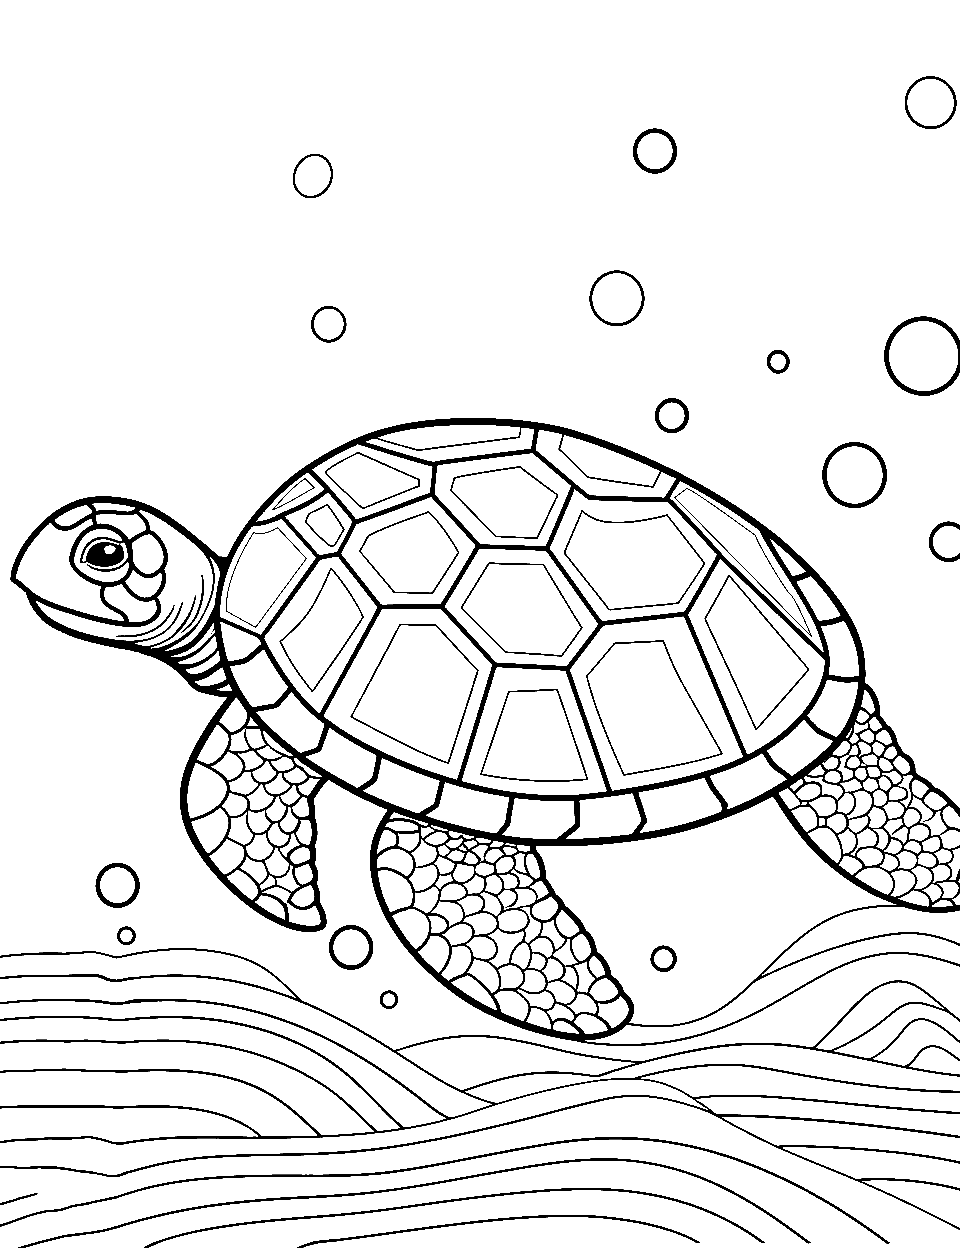 Pretty Shell Patterns Turtle Coloring Page - A turtle with intricate patterns on its shell awaiting colorful details.